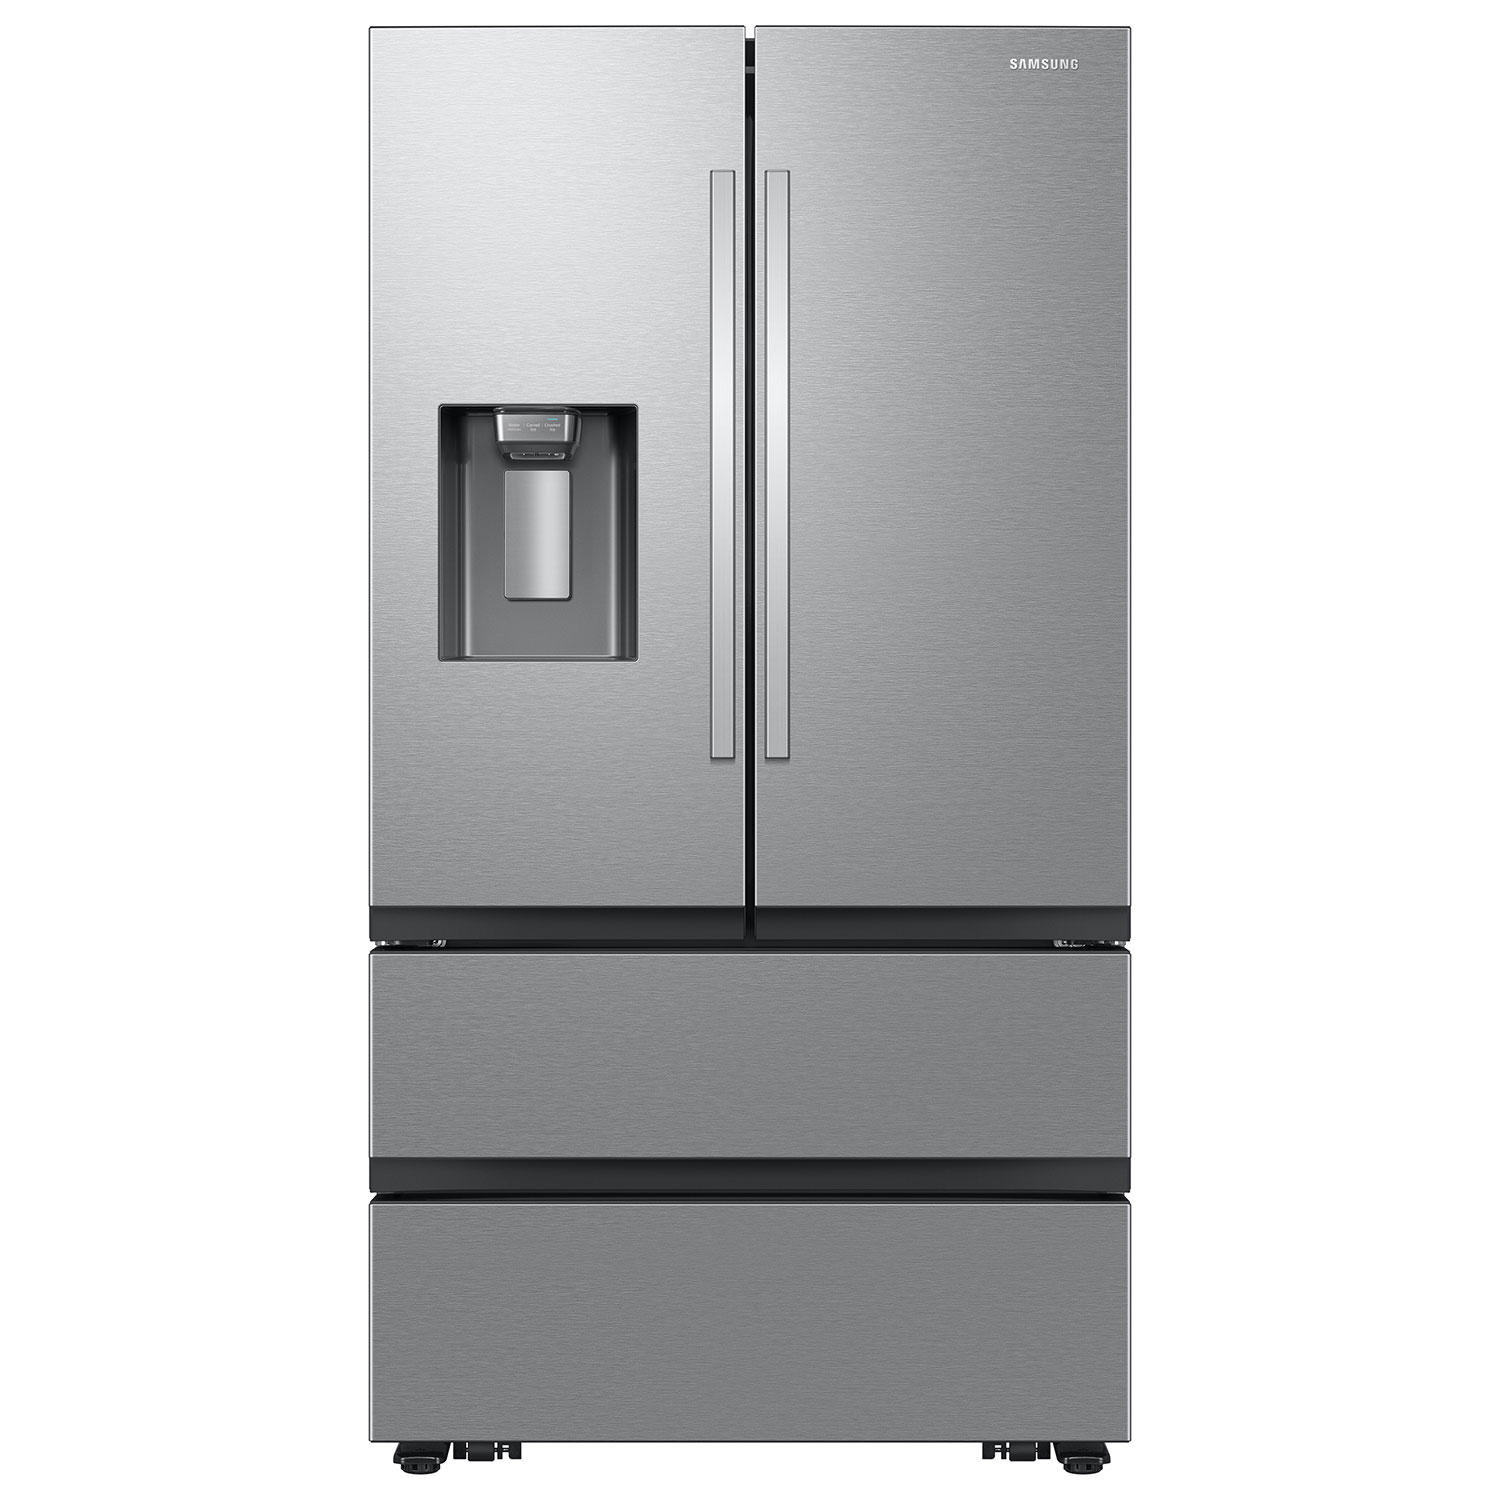 Samsung 25 Cu. Ft. Mega Capacity Counter Depth French Door Refrigerator w/ Four Types of Ice